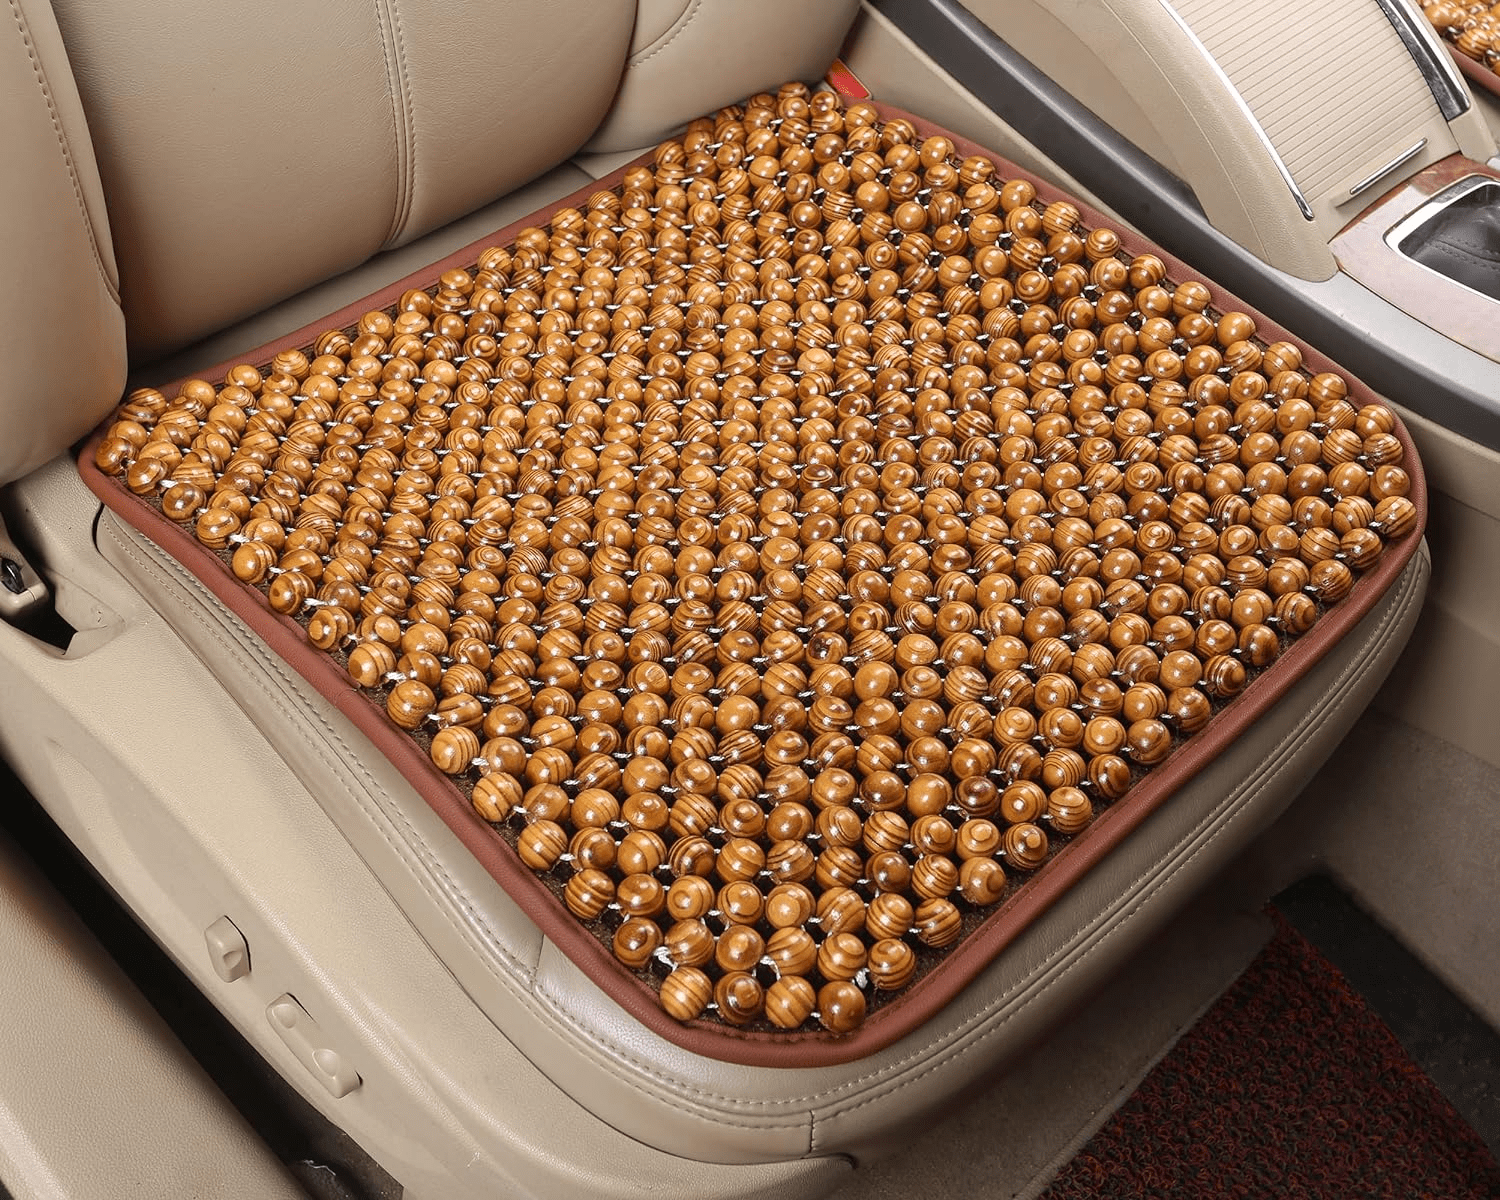 beaded seat covers